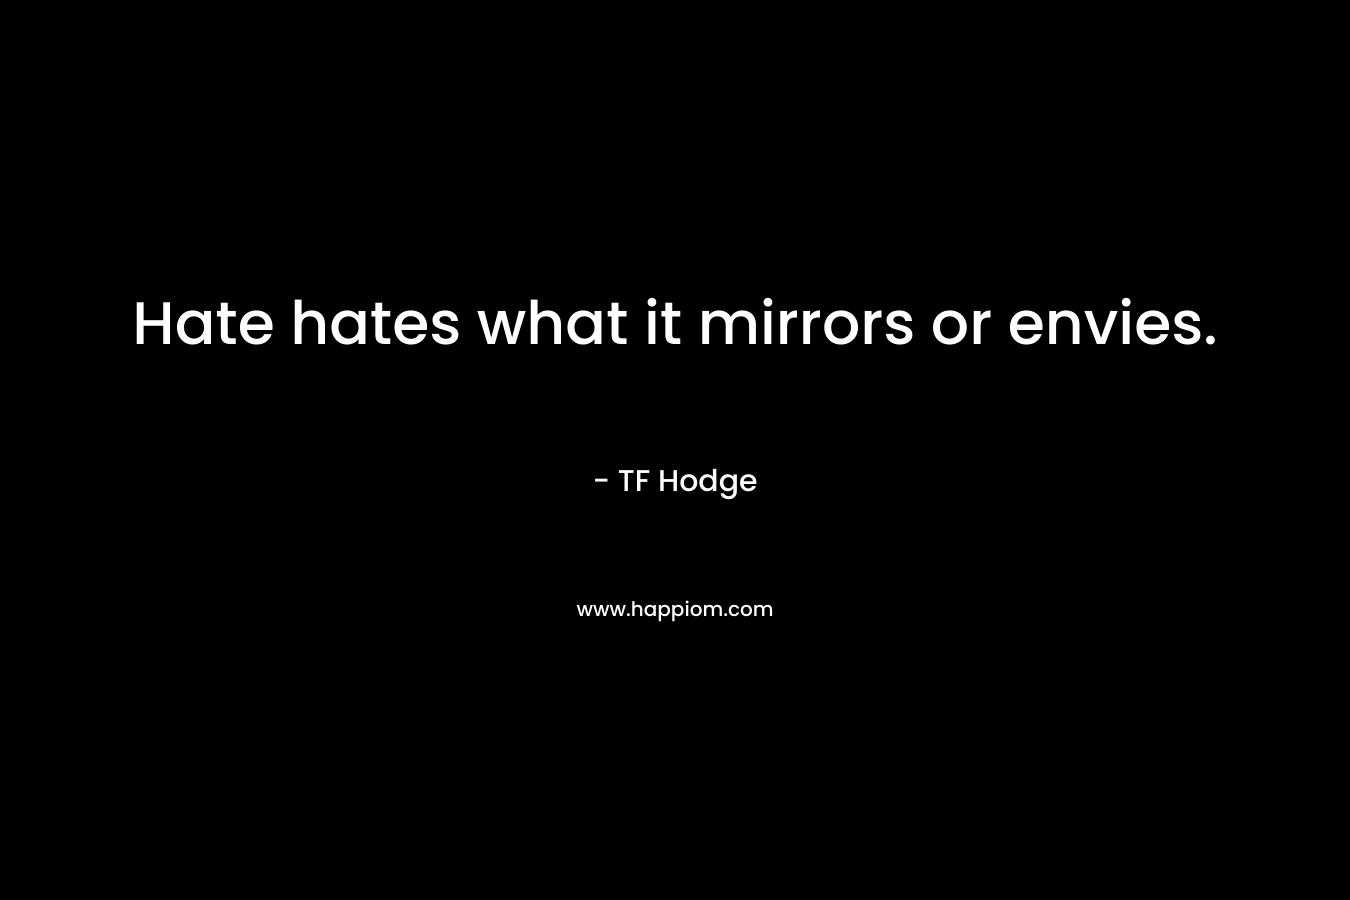 Hate hates what it mirrors or envies.